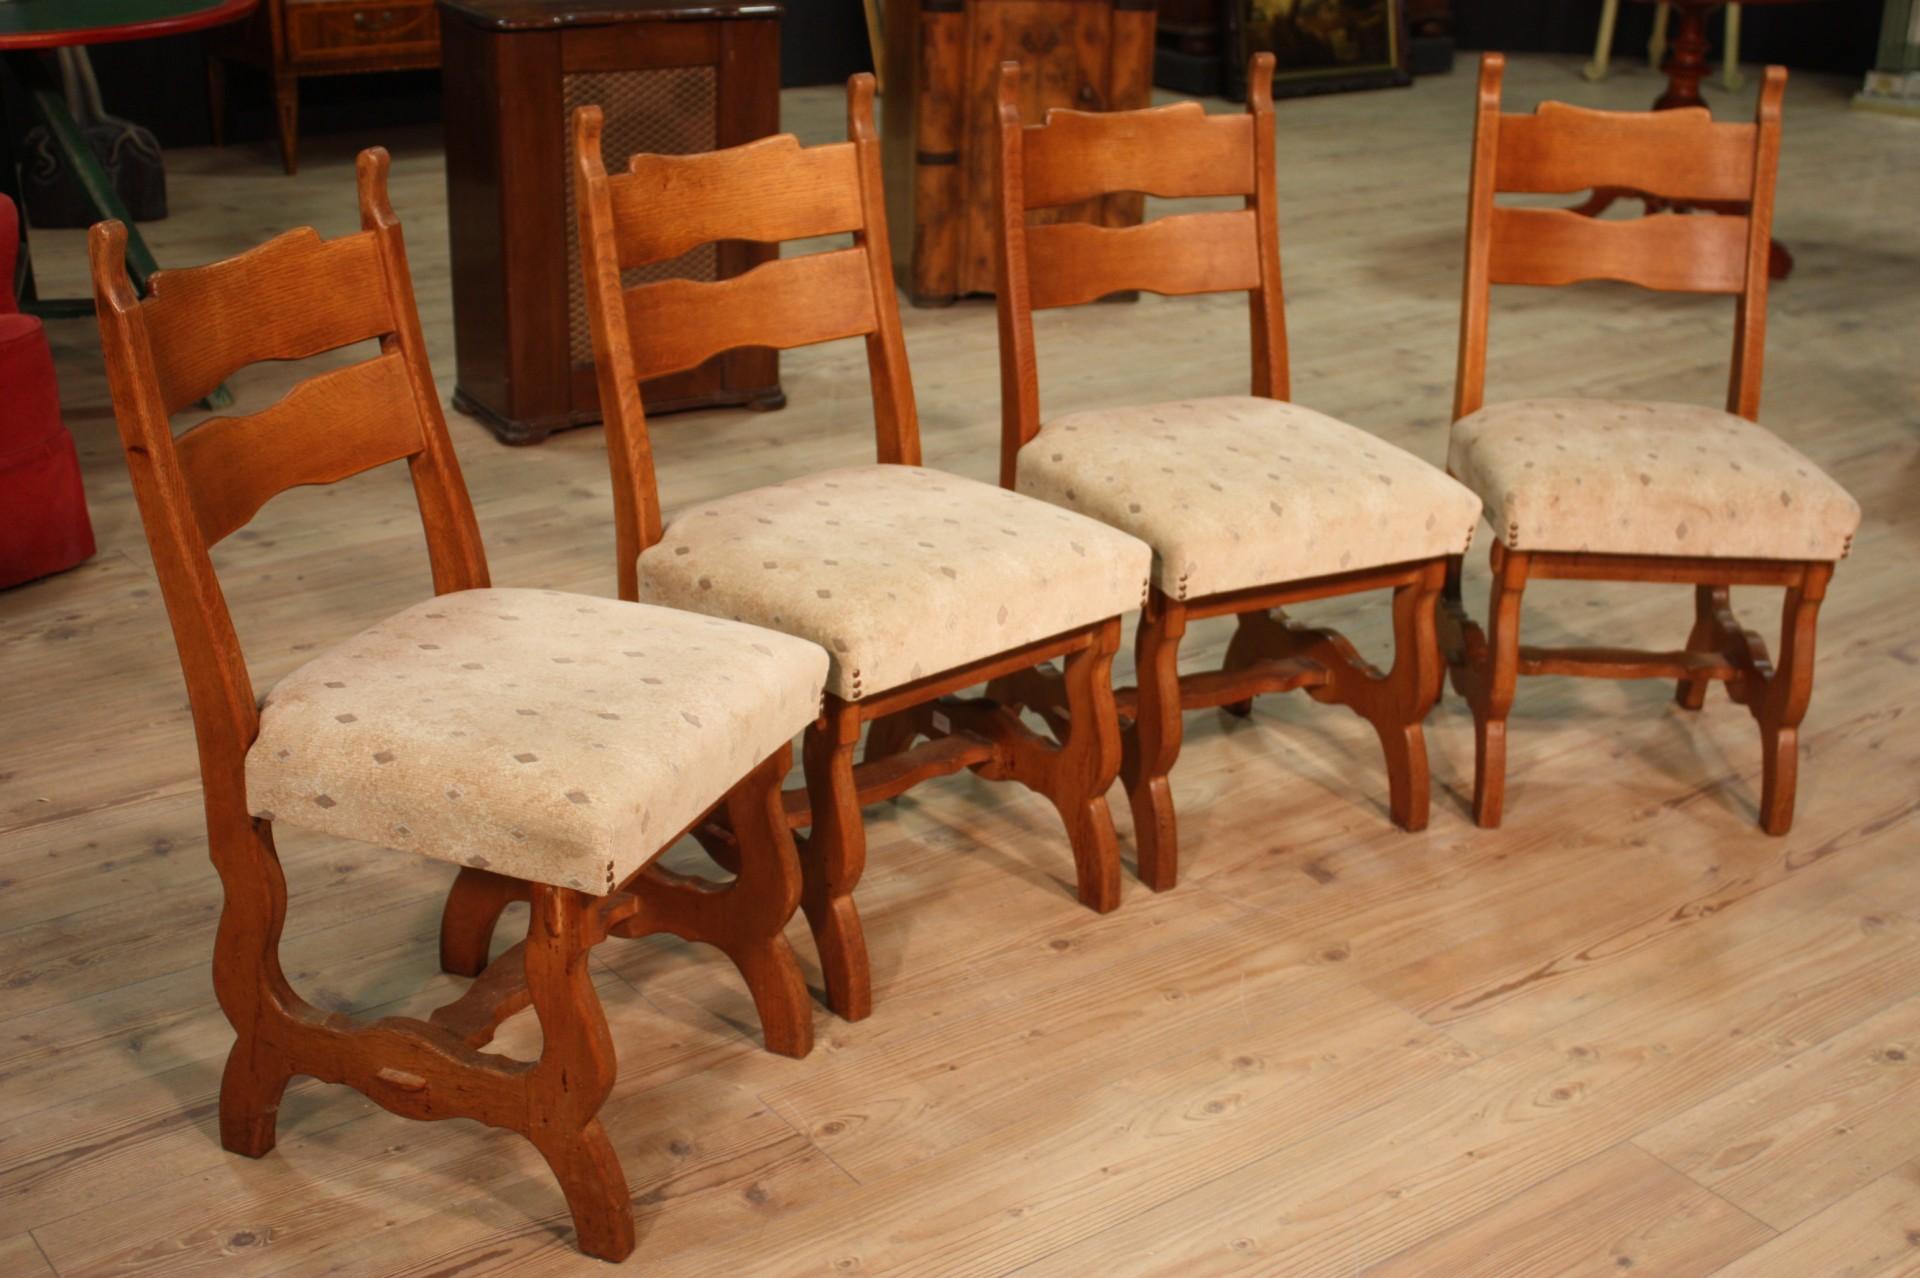 Group of 4 Rustic Northern European Chairs, 20th Century For Sale 5